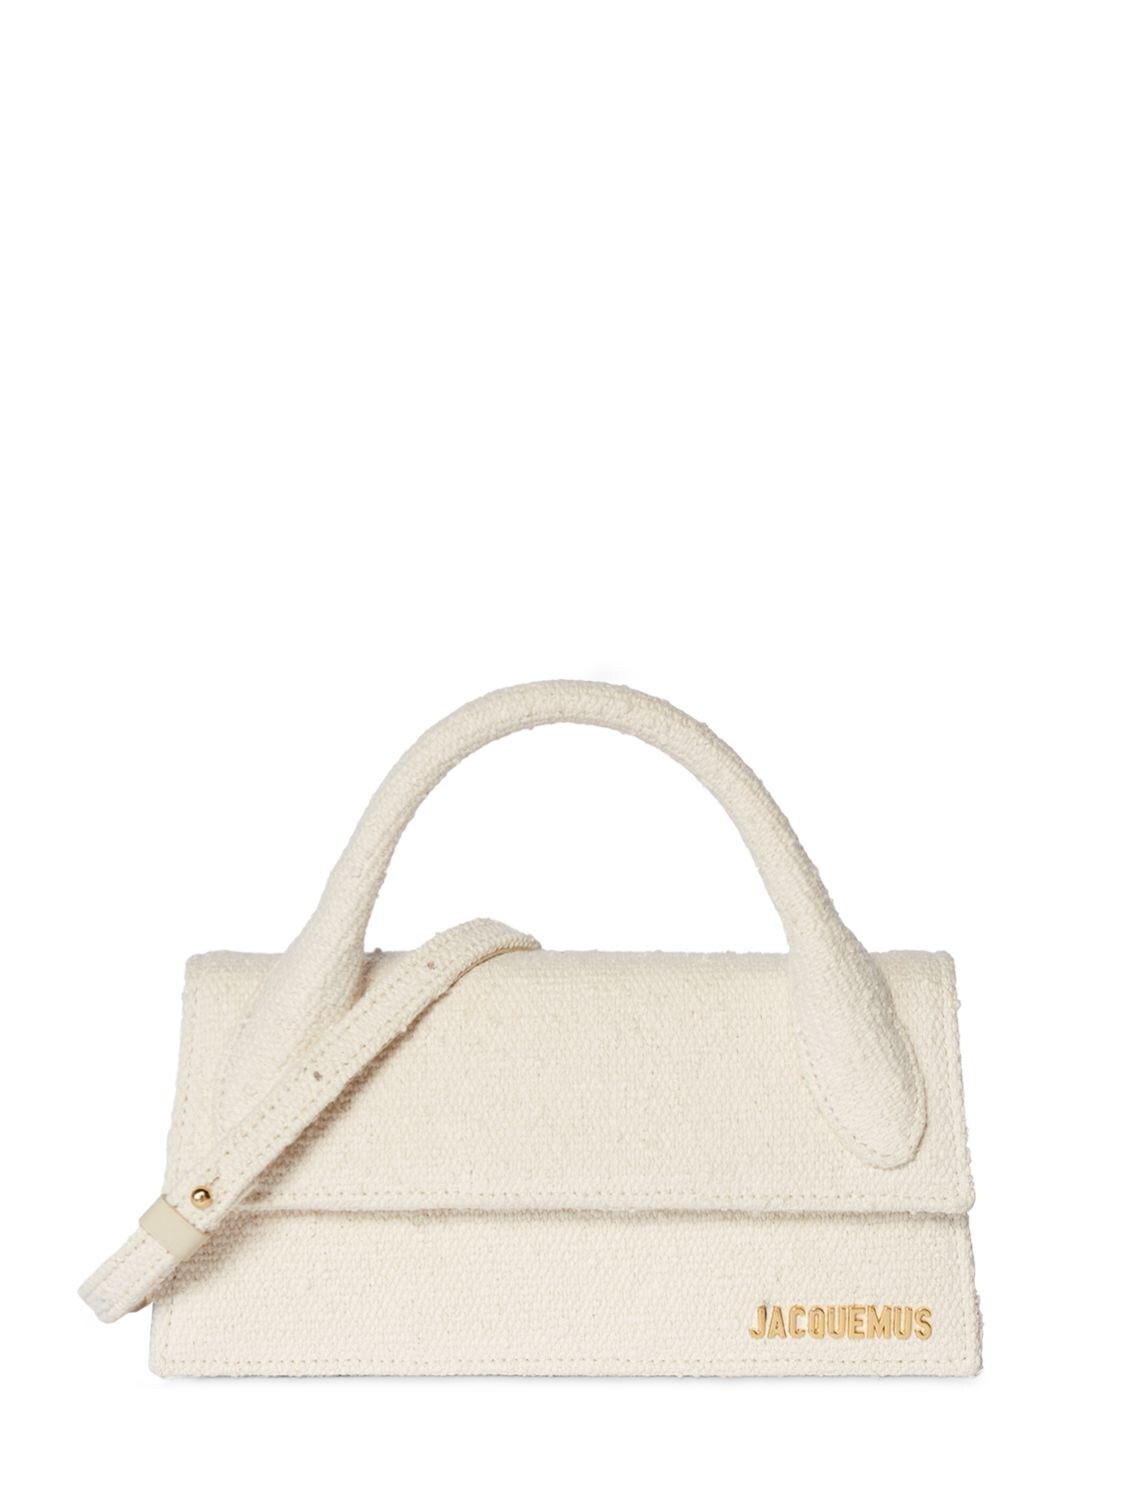 Jacquemus Canvas Le Chiquito Long Top-handle Bag In Off-white